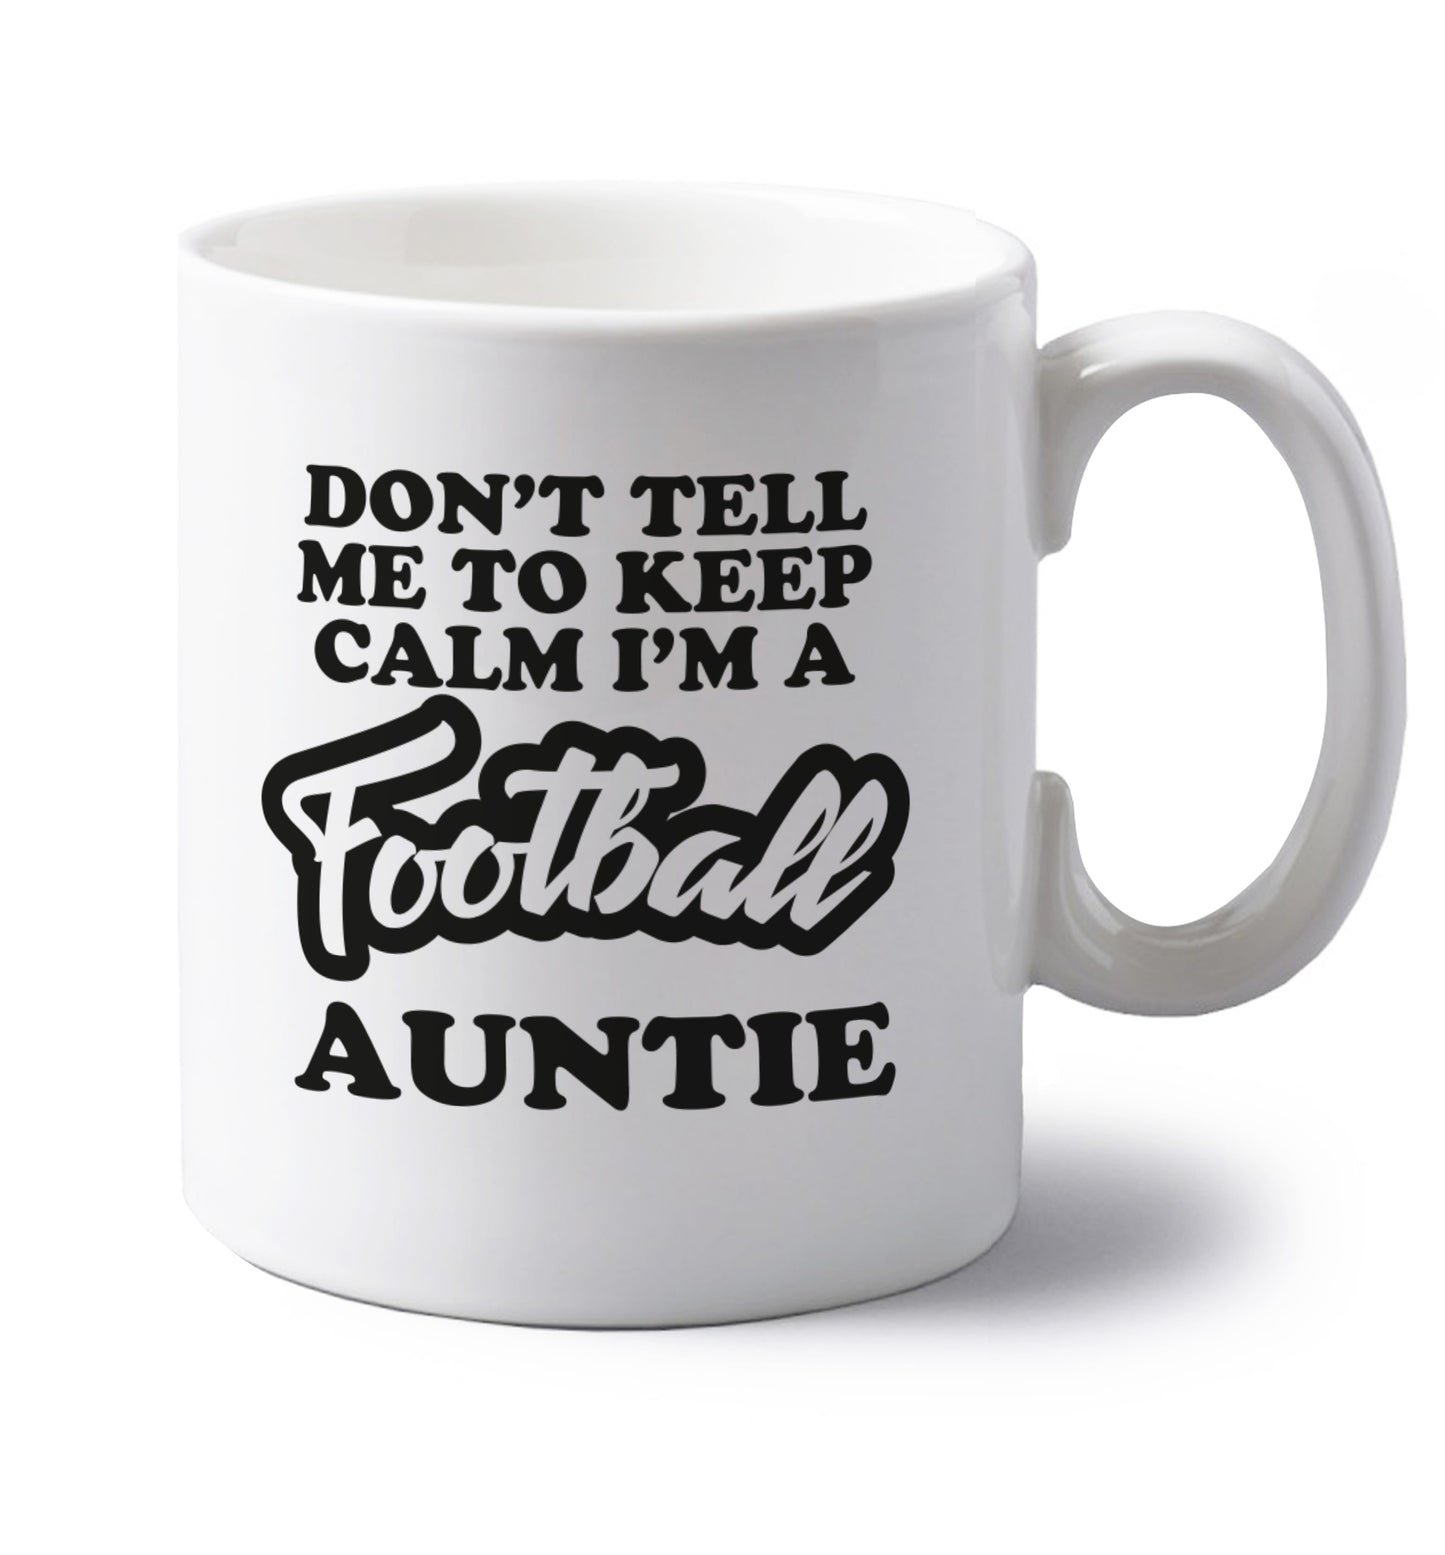 Don't tell me to keep calm I'm a football auntie left handed white ceramic mug 